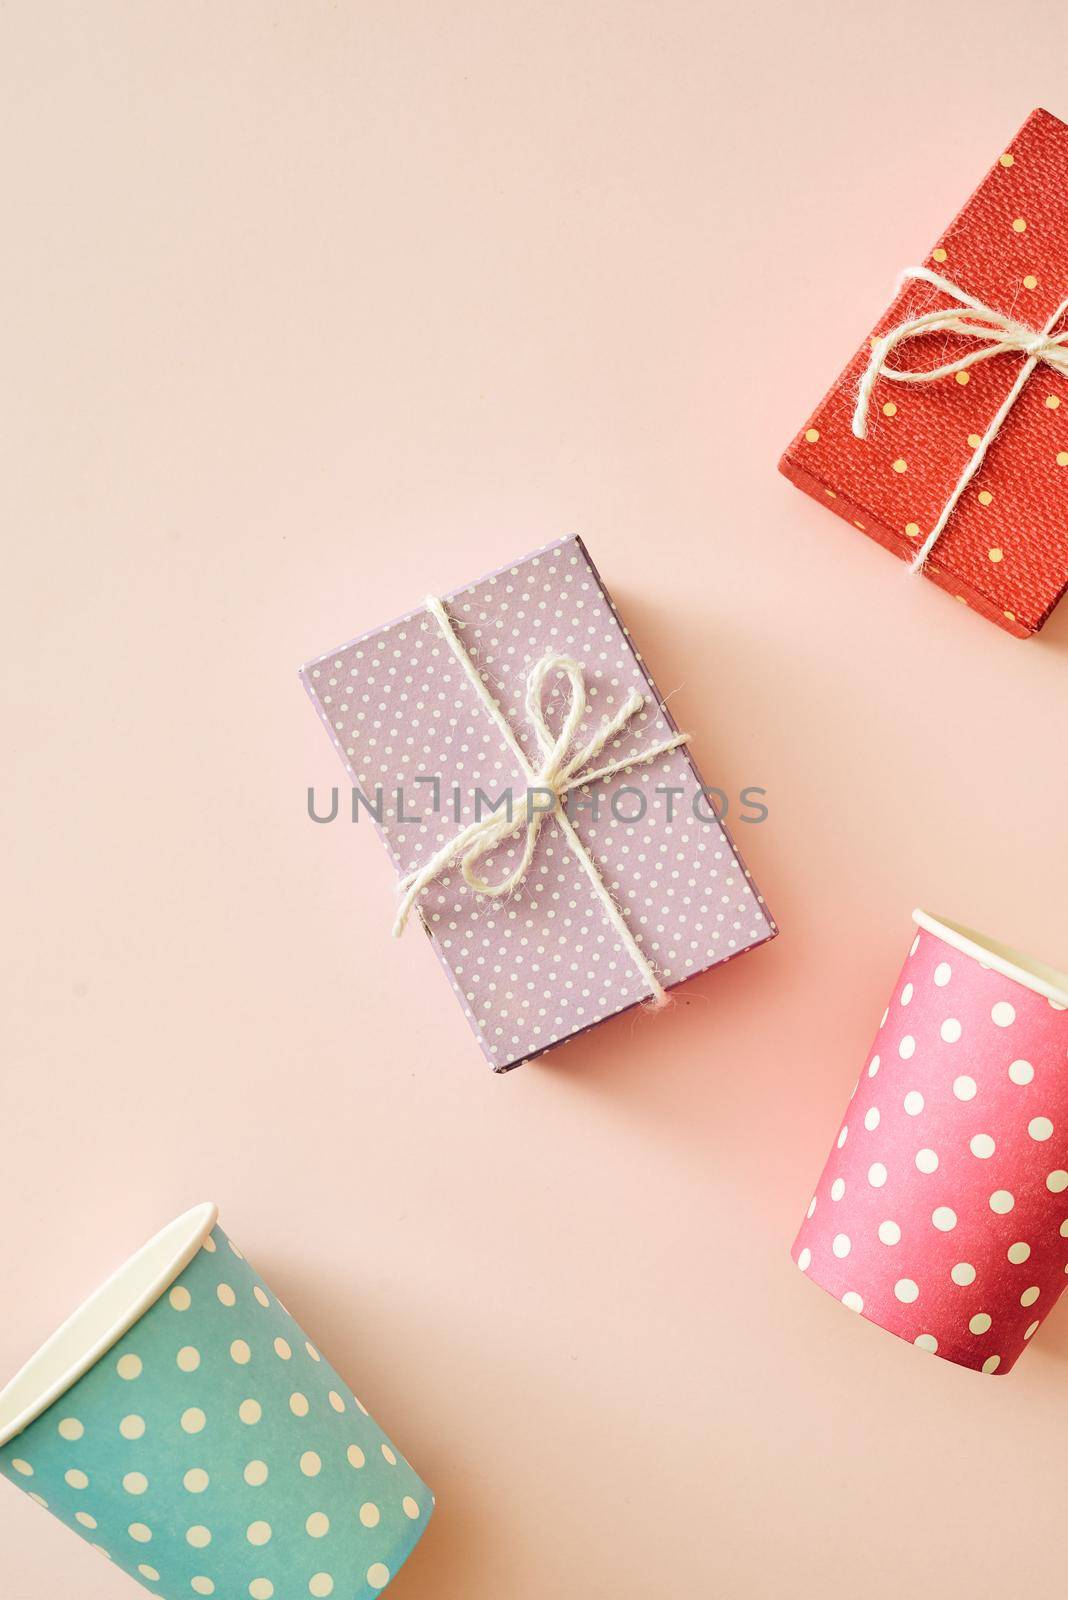 Fashion party background with colorful gift boxes on pink background by makidotvn